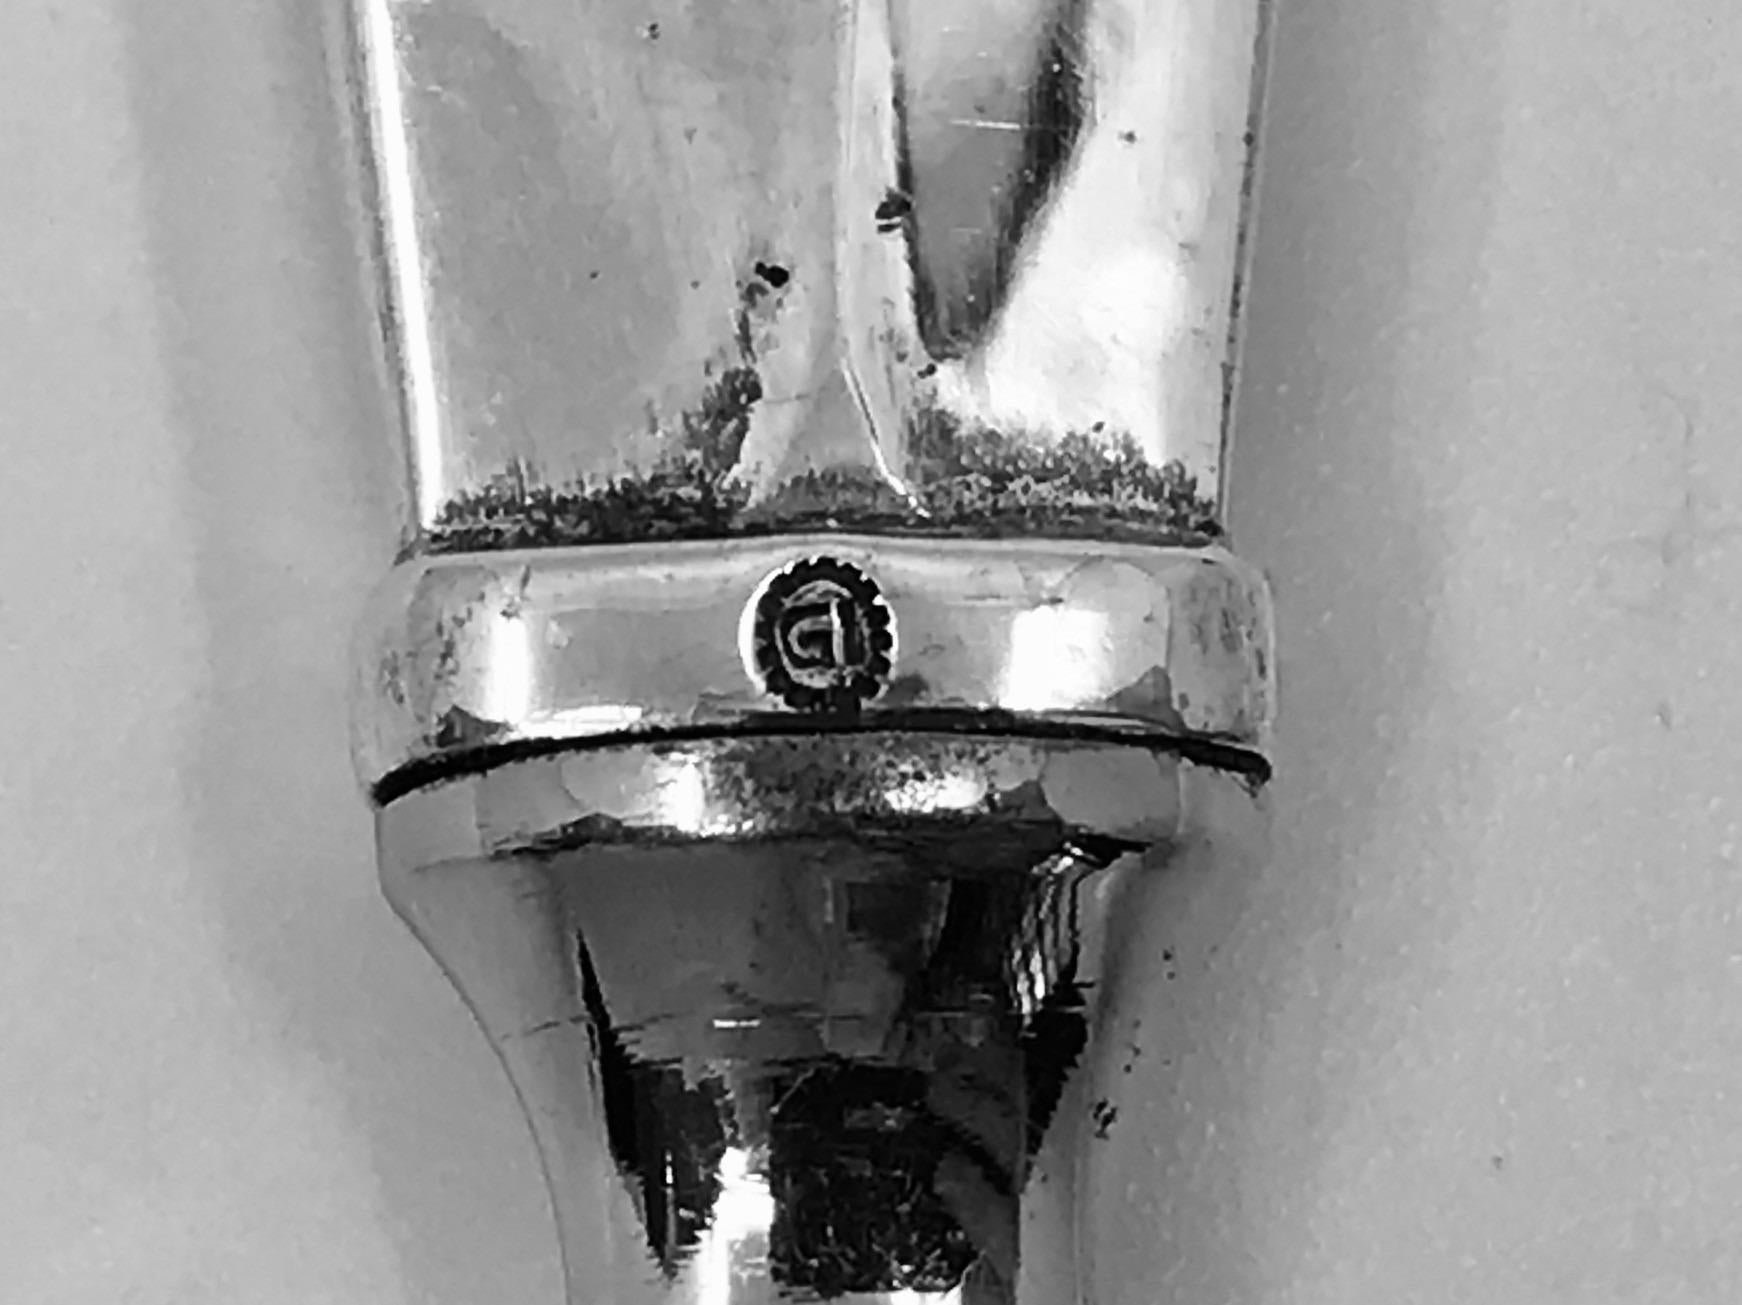 Georg Jensen sterling silver and stainless short handled bottle opener, item 271 in the Bittersweet pattern, flatware design #79 by Gundorph Albertus from 1940. Bittersweet is the sister pattern to Albertus’ better known Cactus pattern, because of